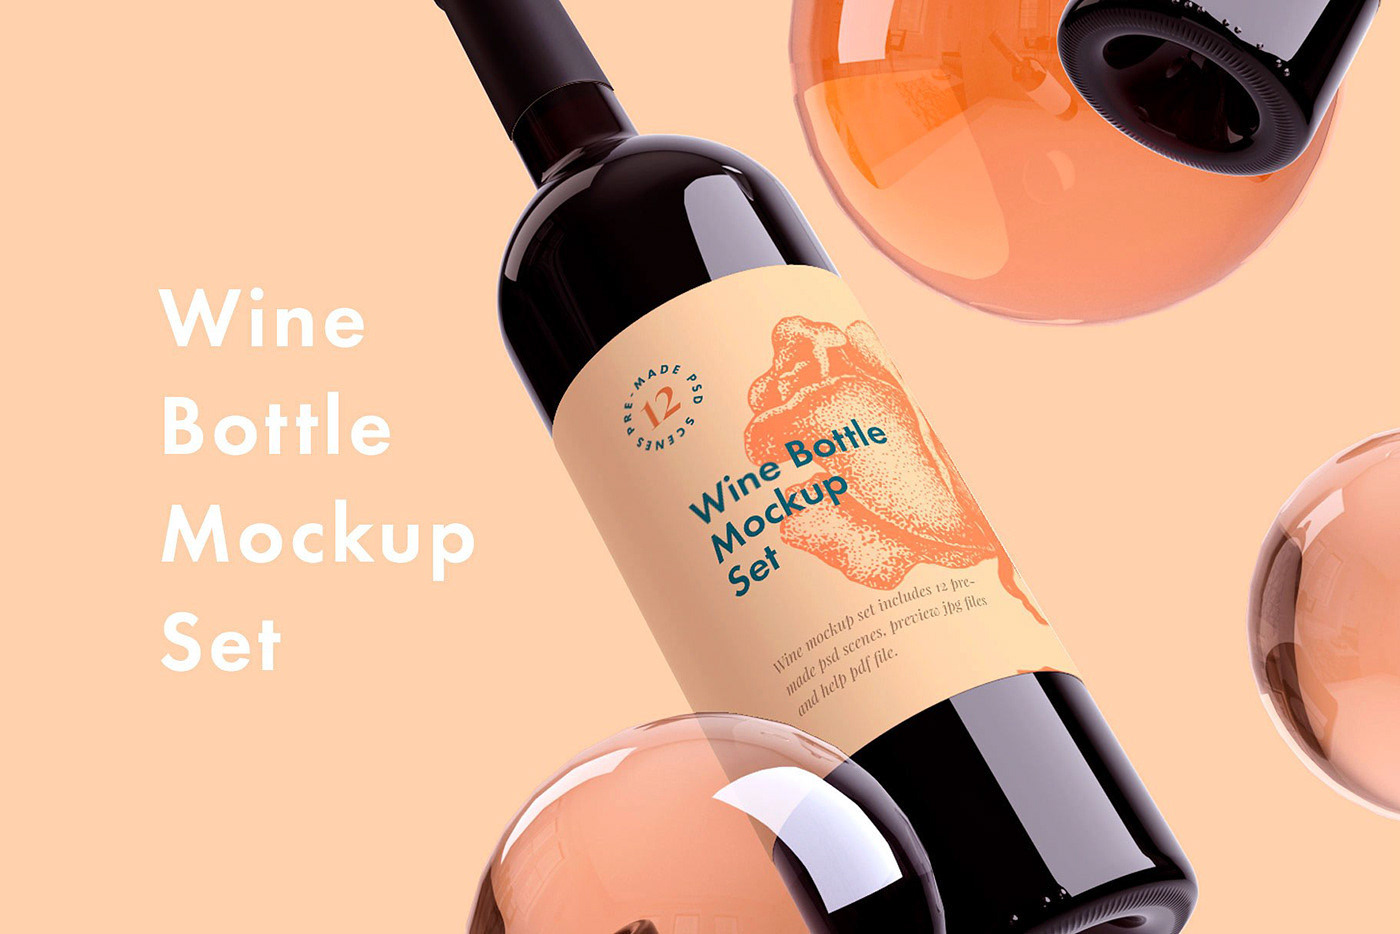 Download Wine Bottle Mock Up Projects Photos Videos Logos Illustrations And Branding On Behance Yellowimages Mockups